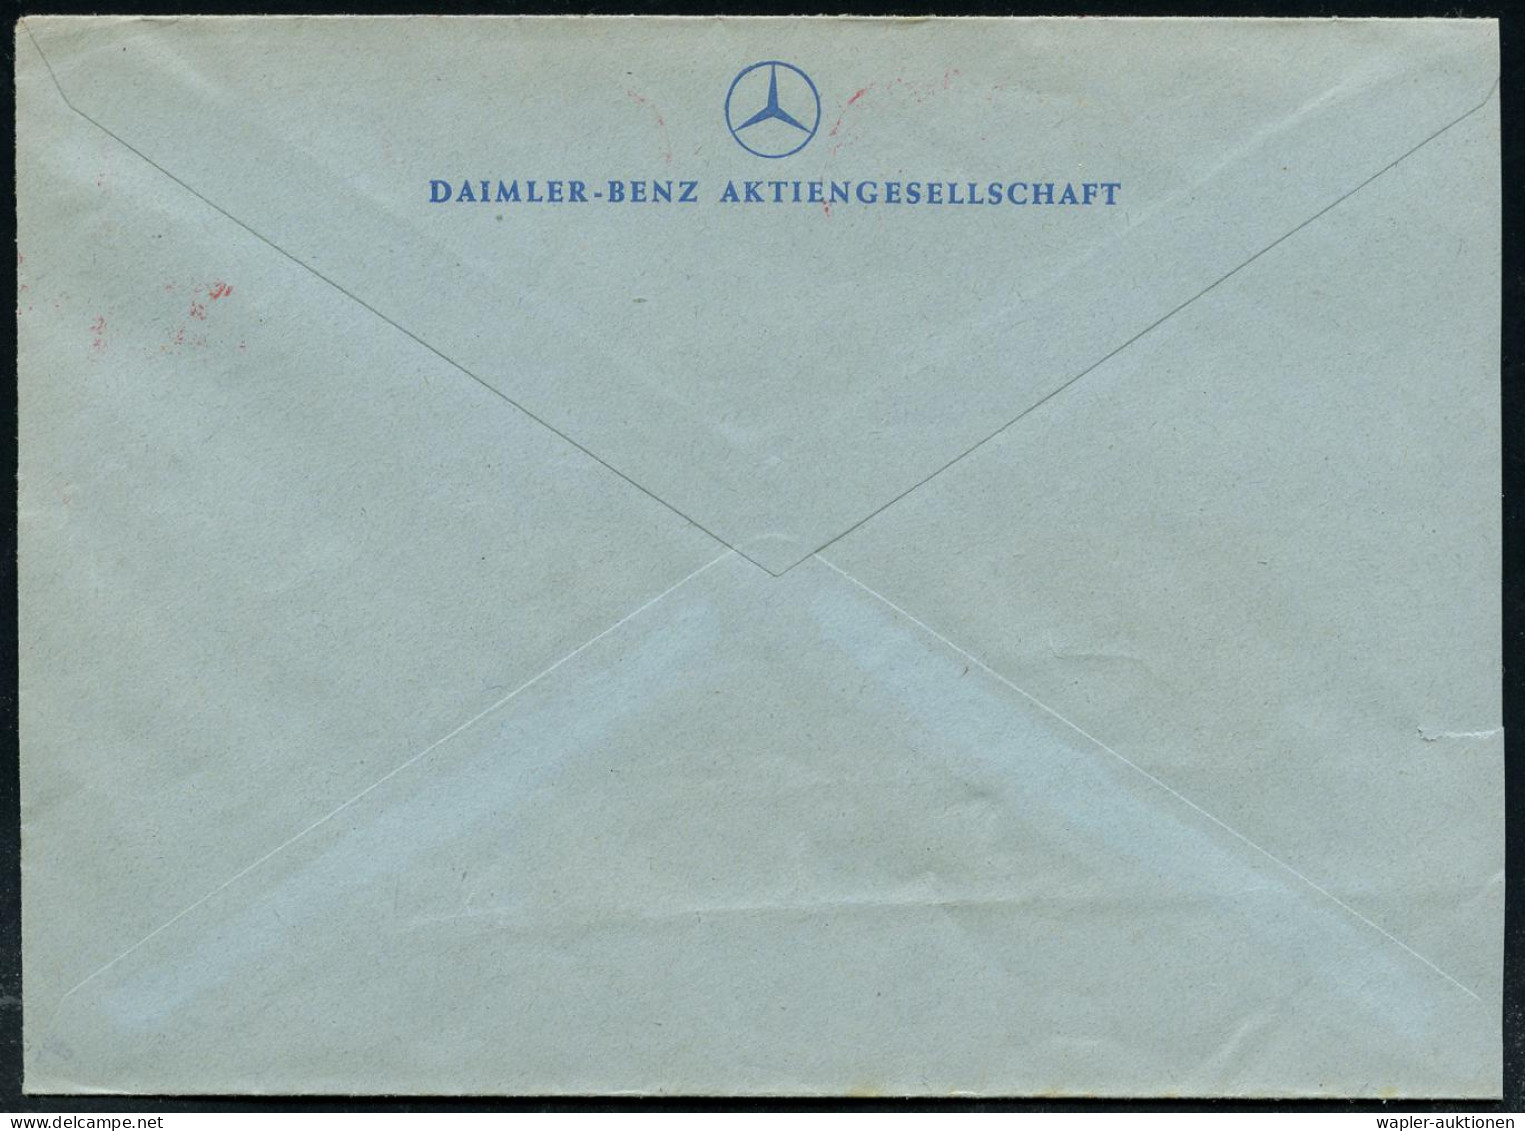 MERCEDES-BENZ  / DAIMLER BENZ - MERCEDES-BENZ / DAIMLER BENZ - MERCEDES-BENZ / DAIMLER BENZ - MERCEDES-BENZ / DAIMLER BE - Voitures